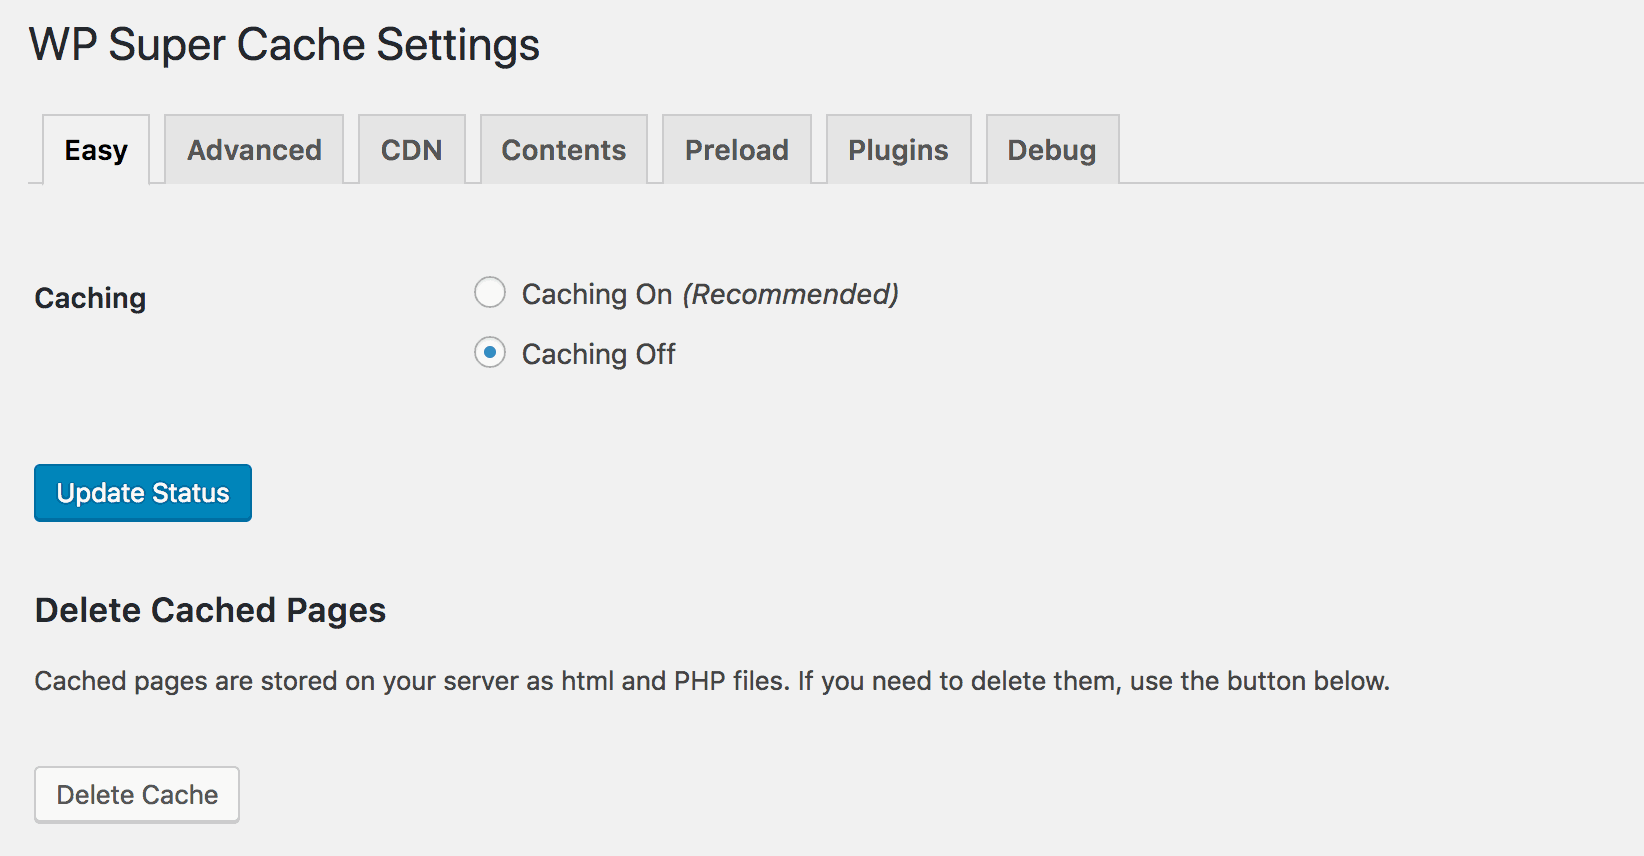 Configuring the settings for WP Super Cache.